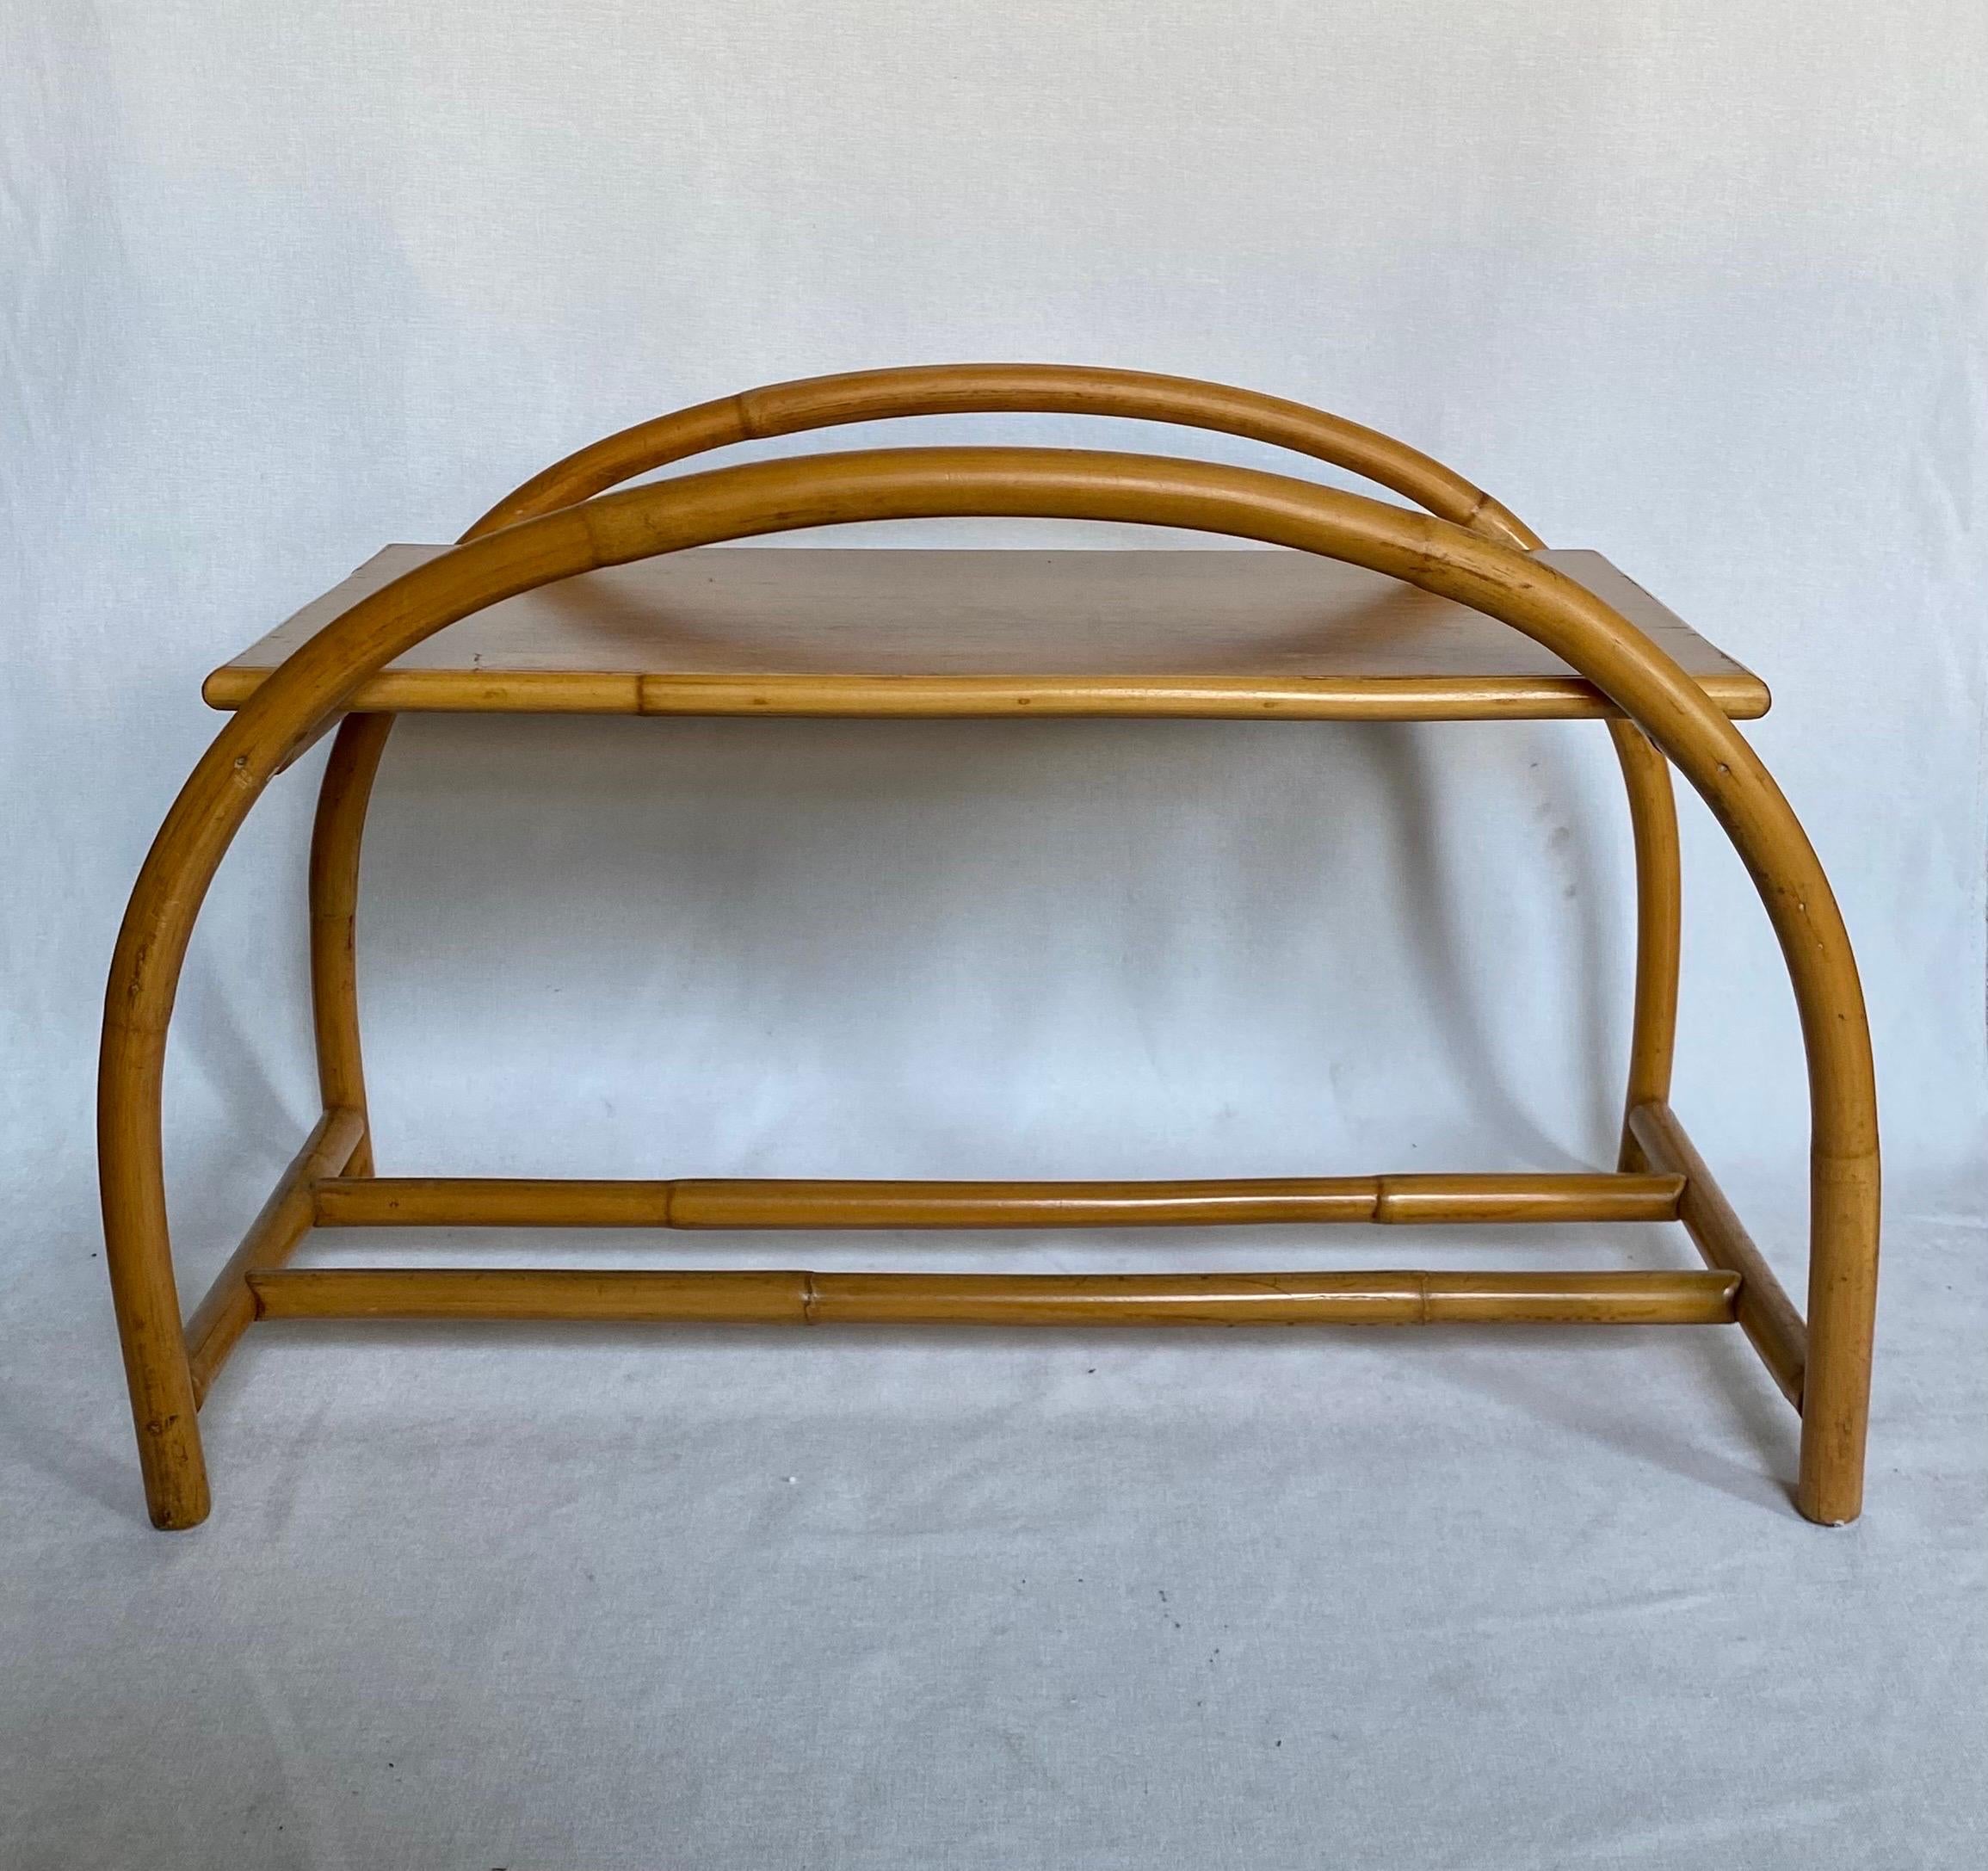 Sculptural Mid-Century Modern natural rattan side or end table with removable clear glass top. This Palm Regency style accent table features a curved arch design with a double stretcher base and natural wood top. In the style of Paul Frankl.